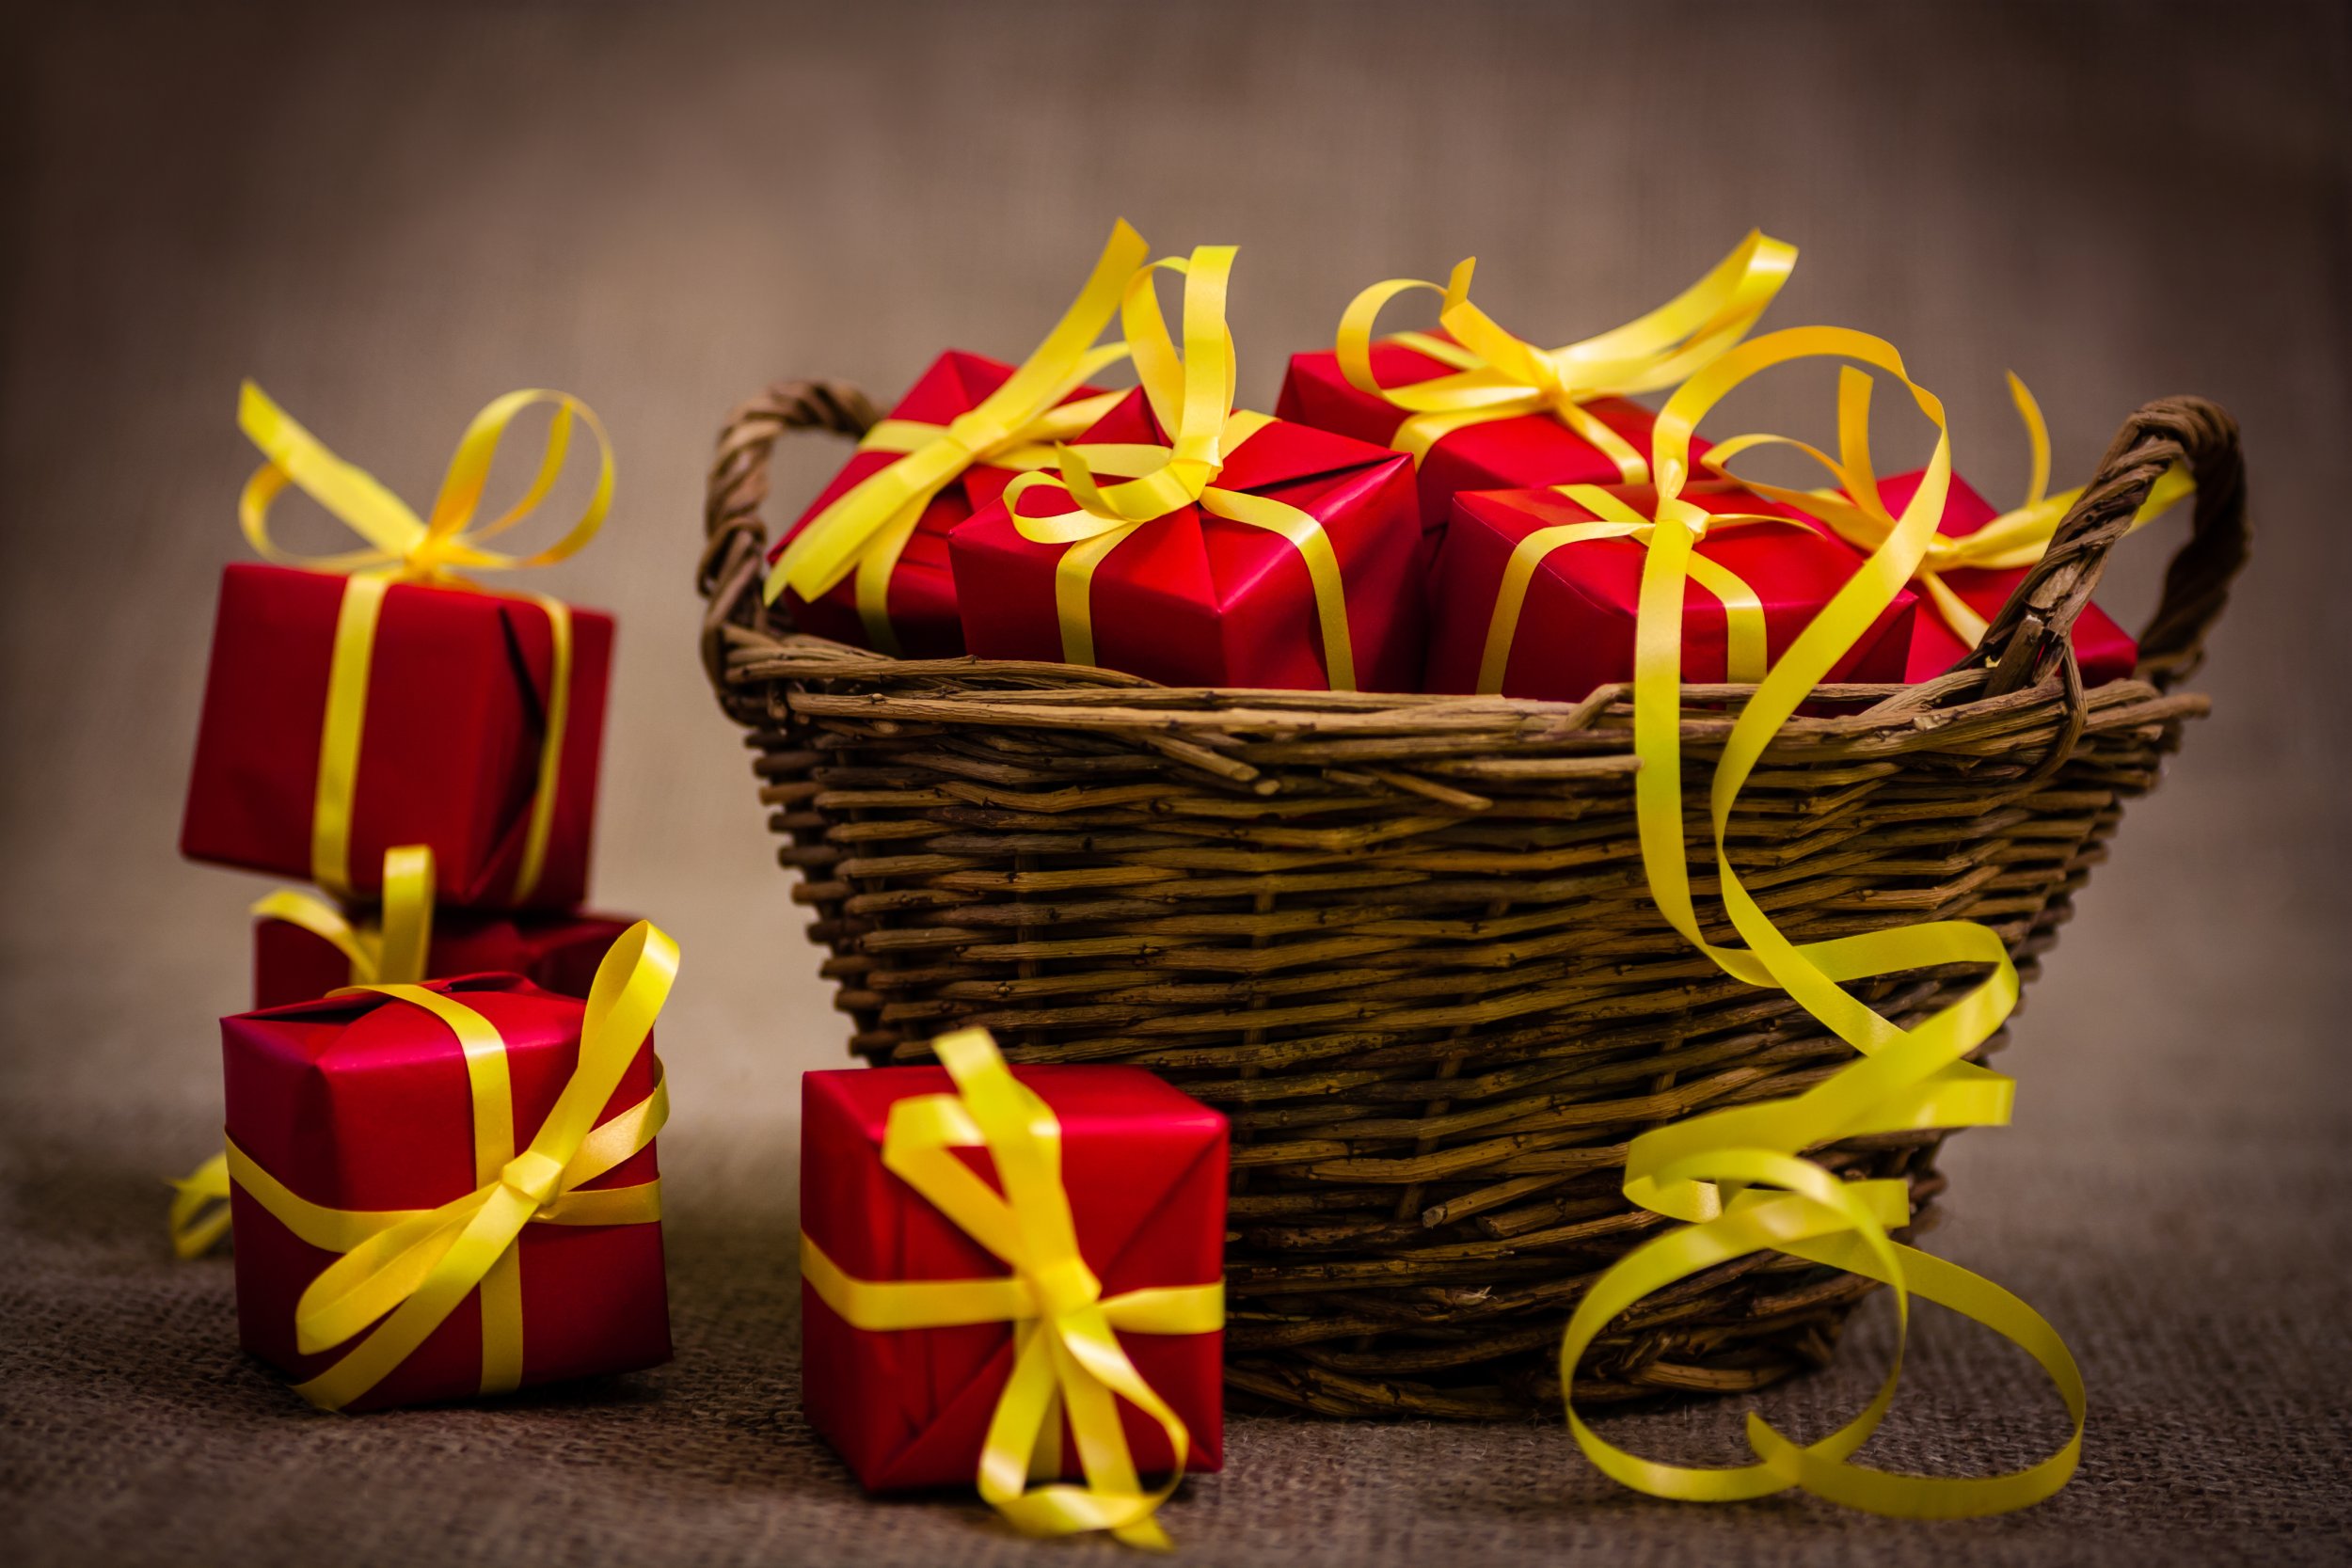 Basket full of red wrapped gifts